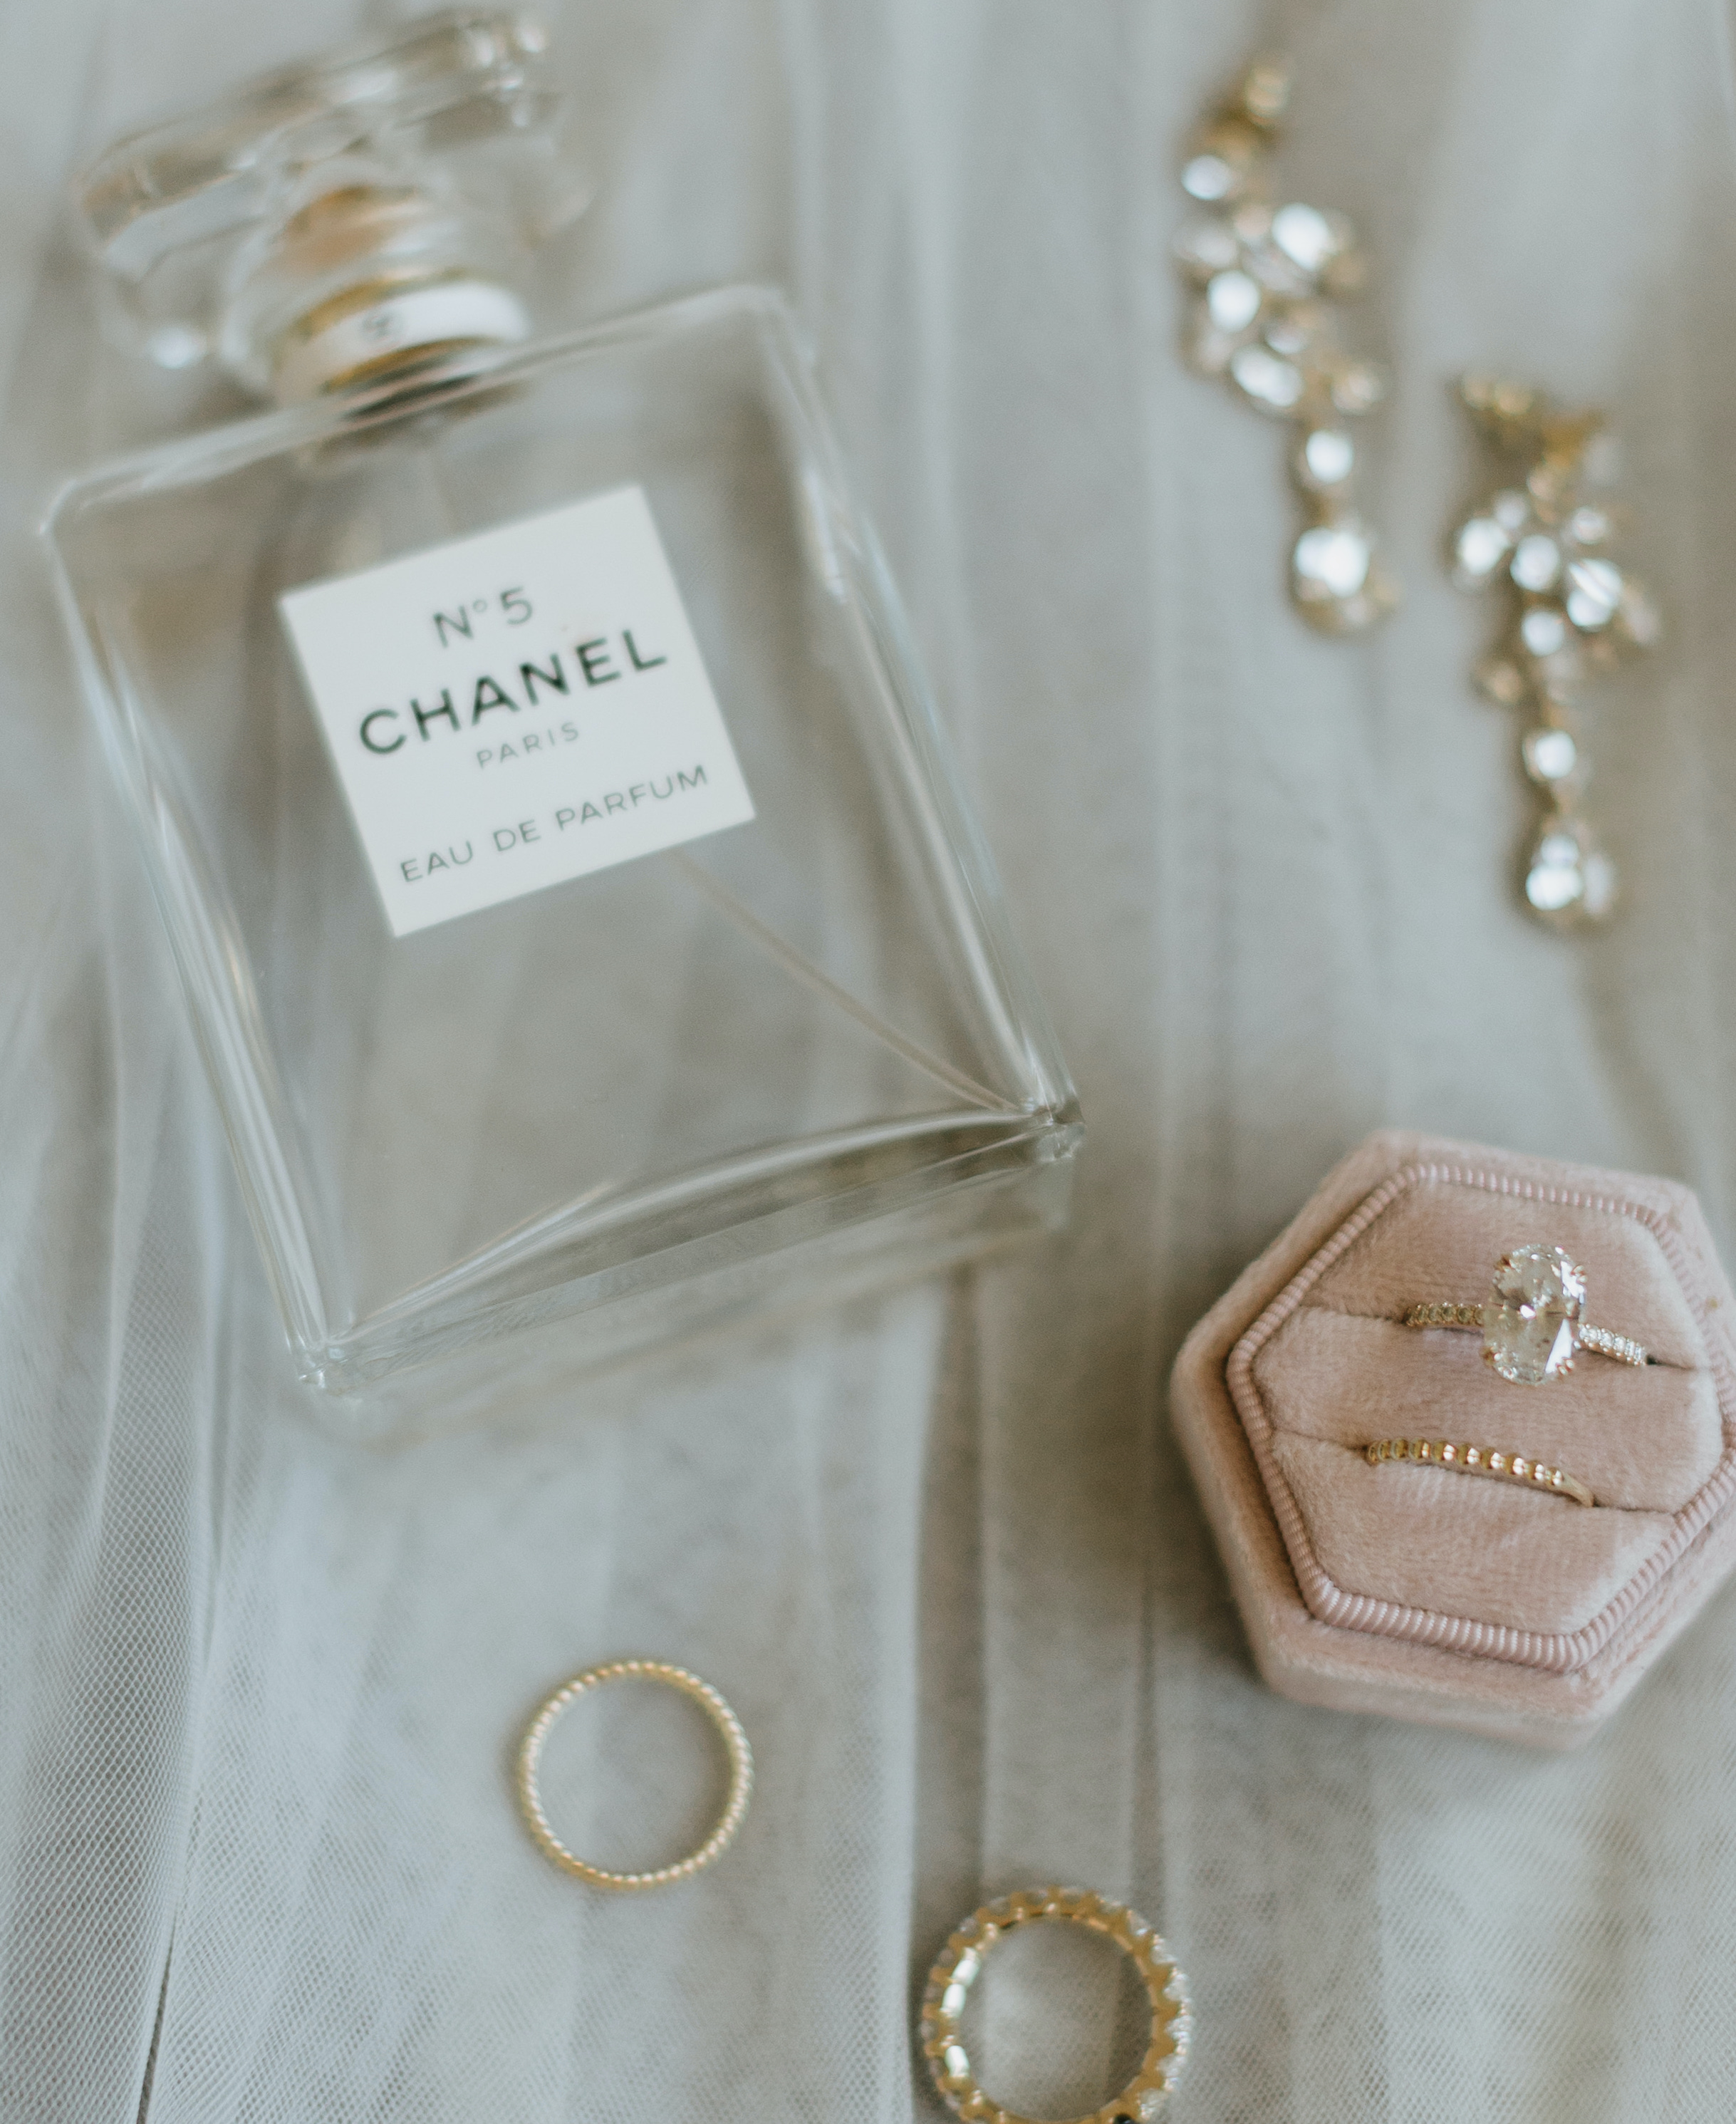 A flatlay of a Chanel perfume bottle and the bride's oval diamond engagement ring in a mauve pink ring box with her wedding band.